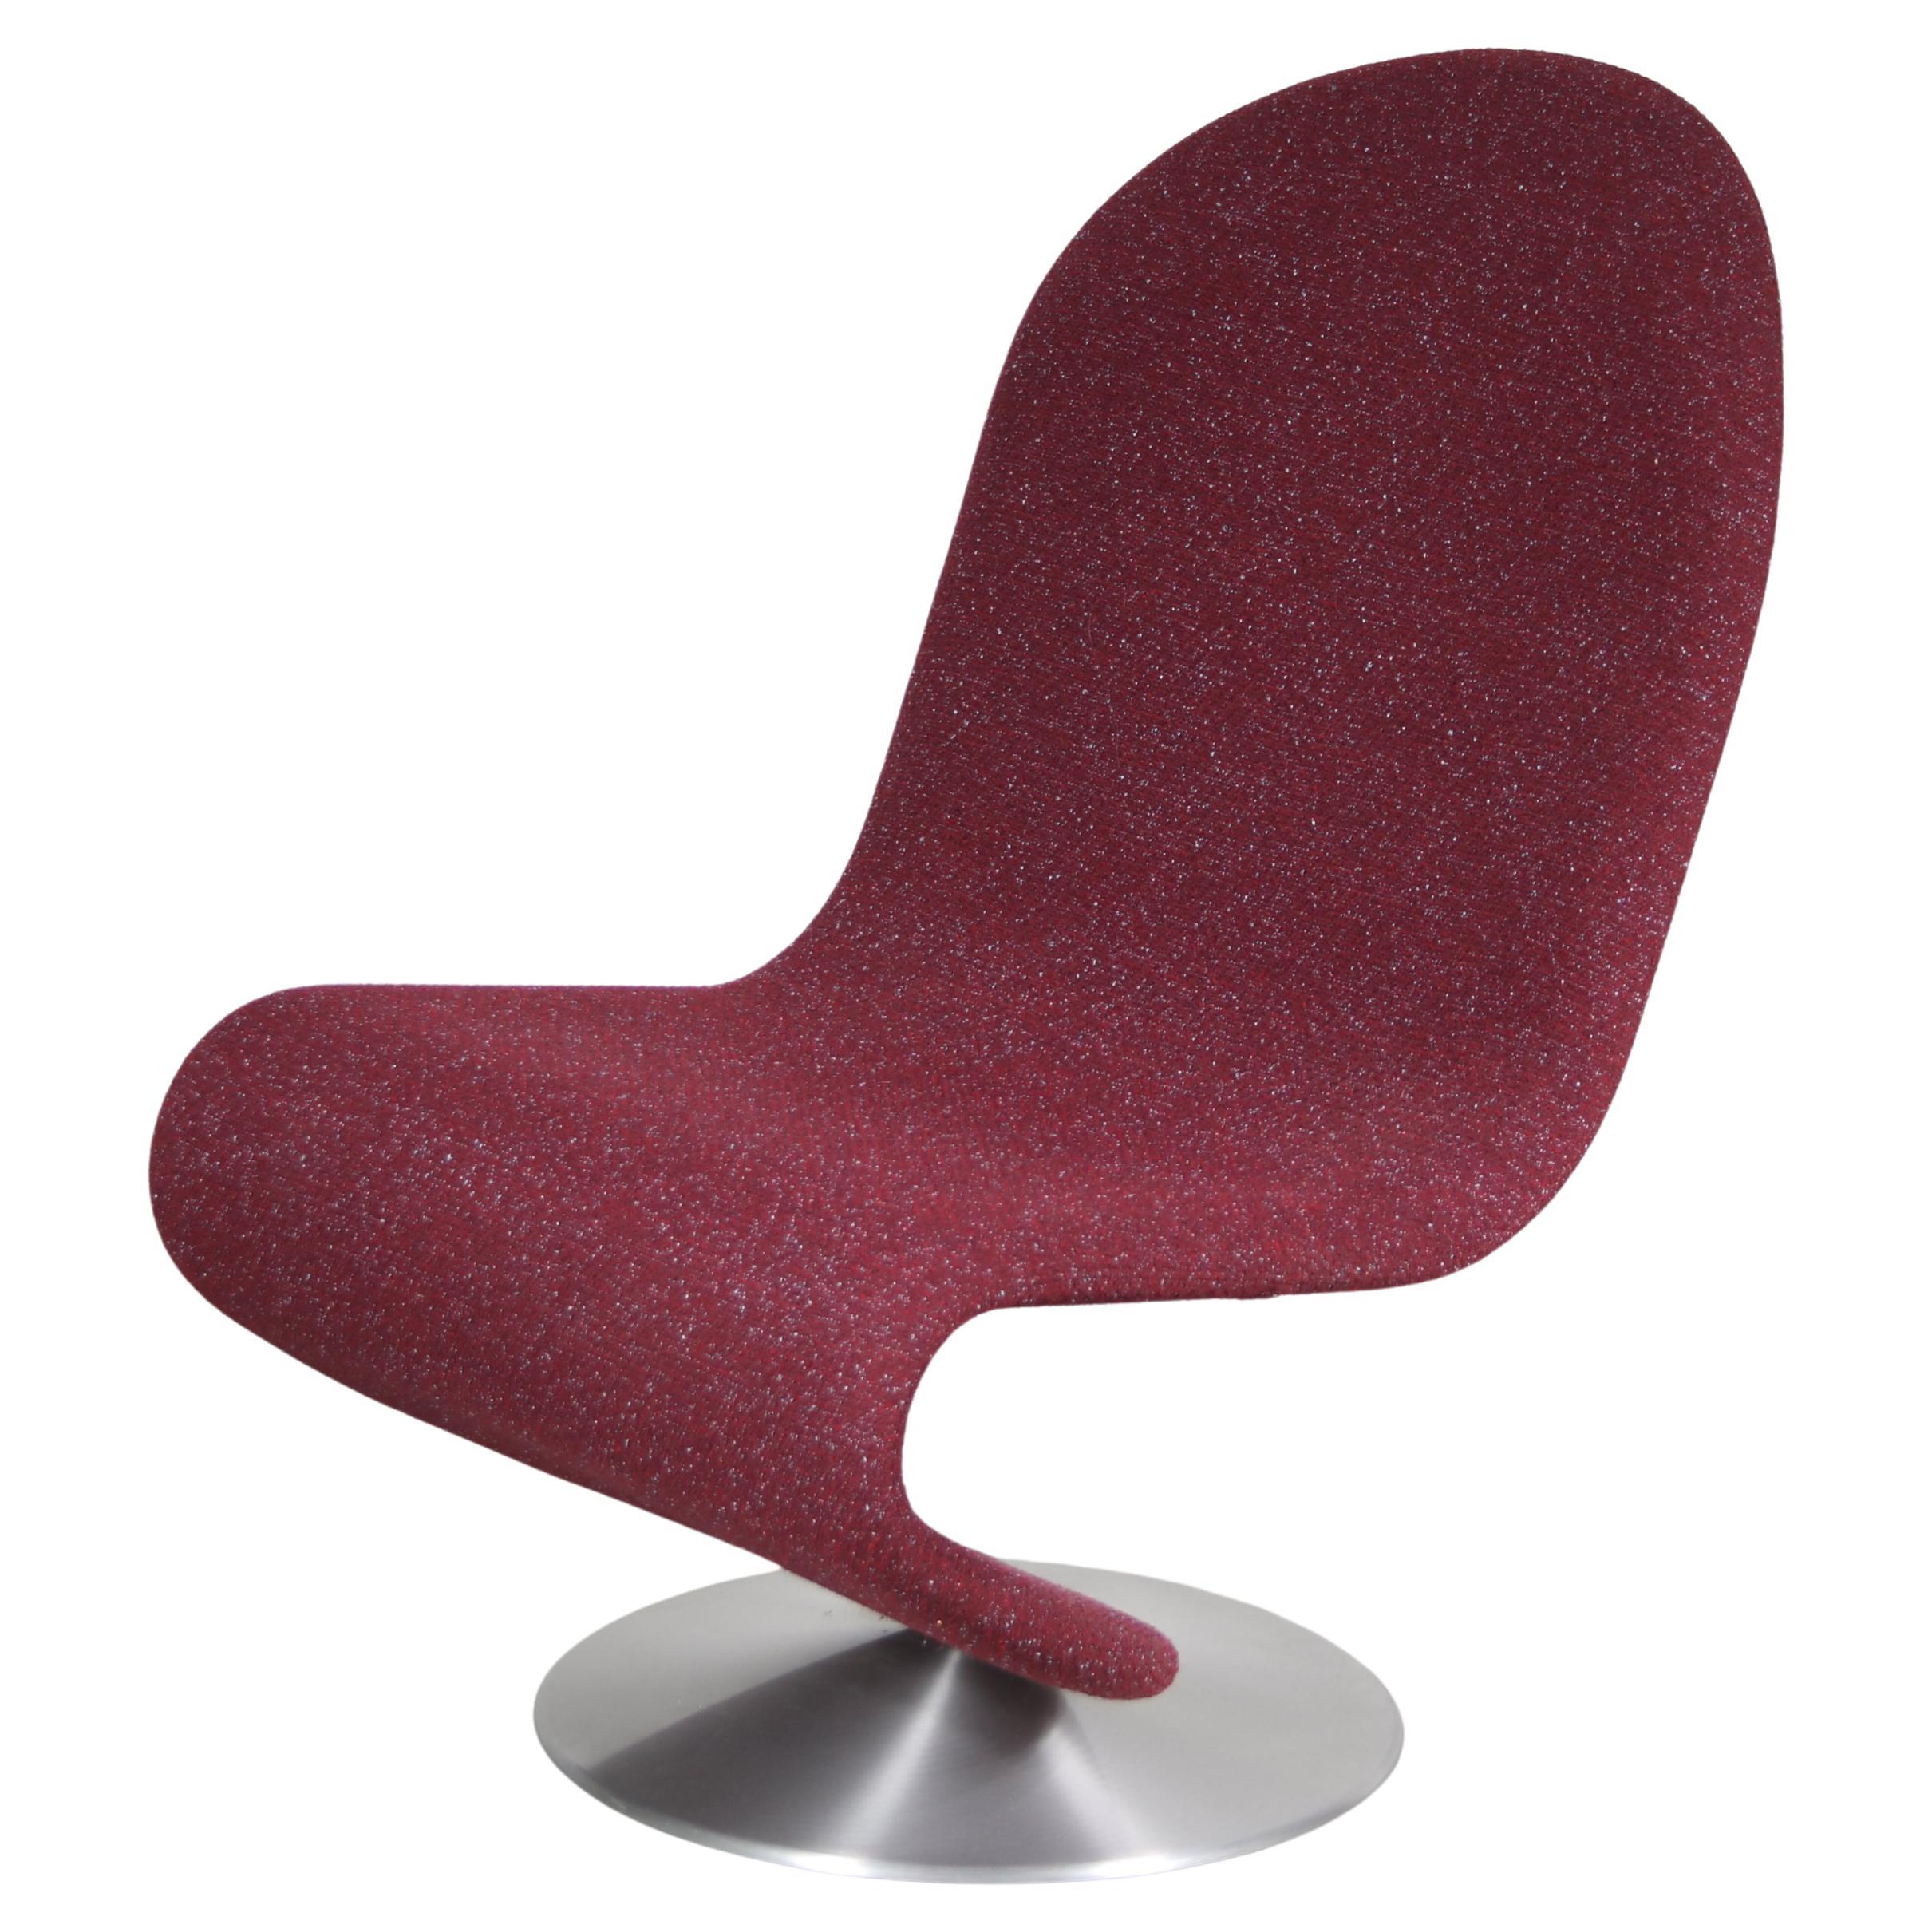 2020s Edition of 1970s 1-2-3 Chair by Verner Panton for VerPan, Denmark For Sale